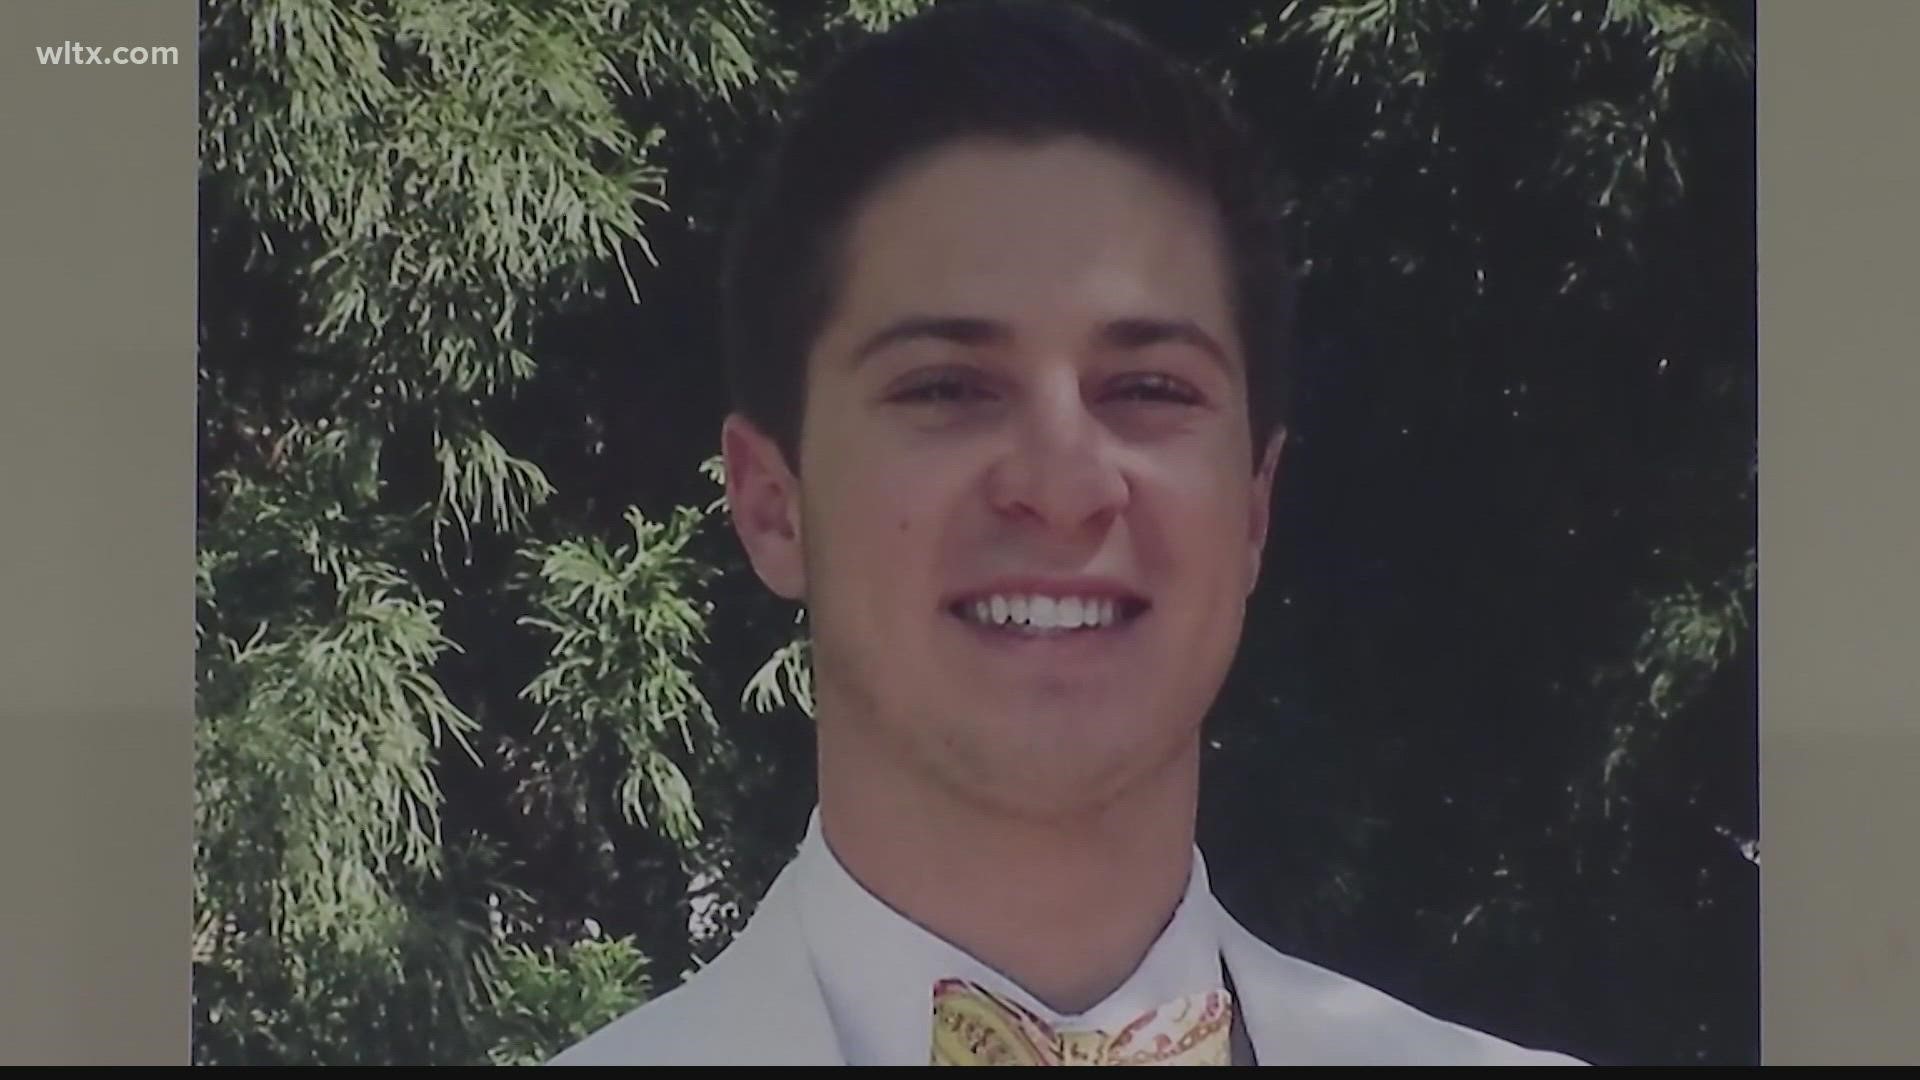 19-year-old Tucker Hipps, a Clemson student, died in 2014, and his death has remained a mystery.